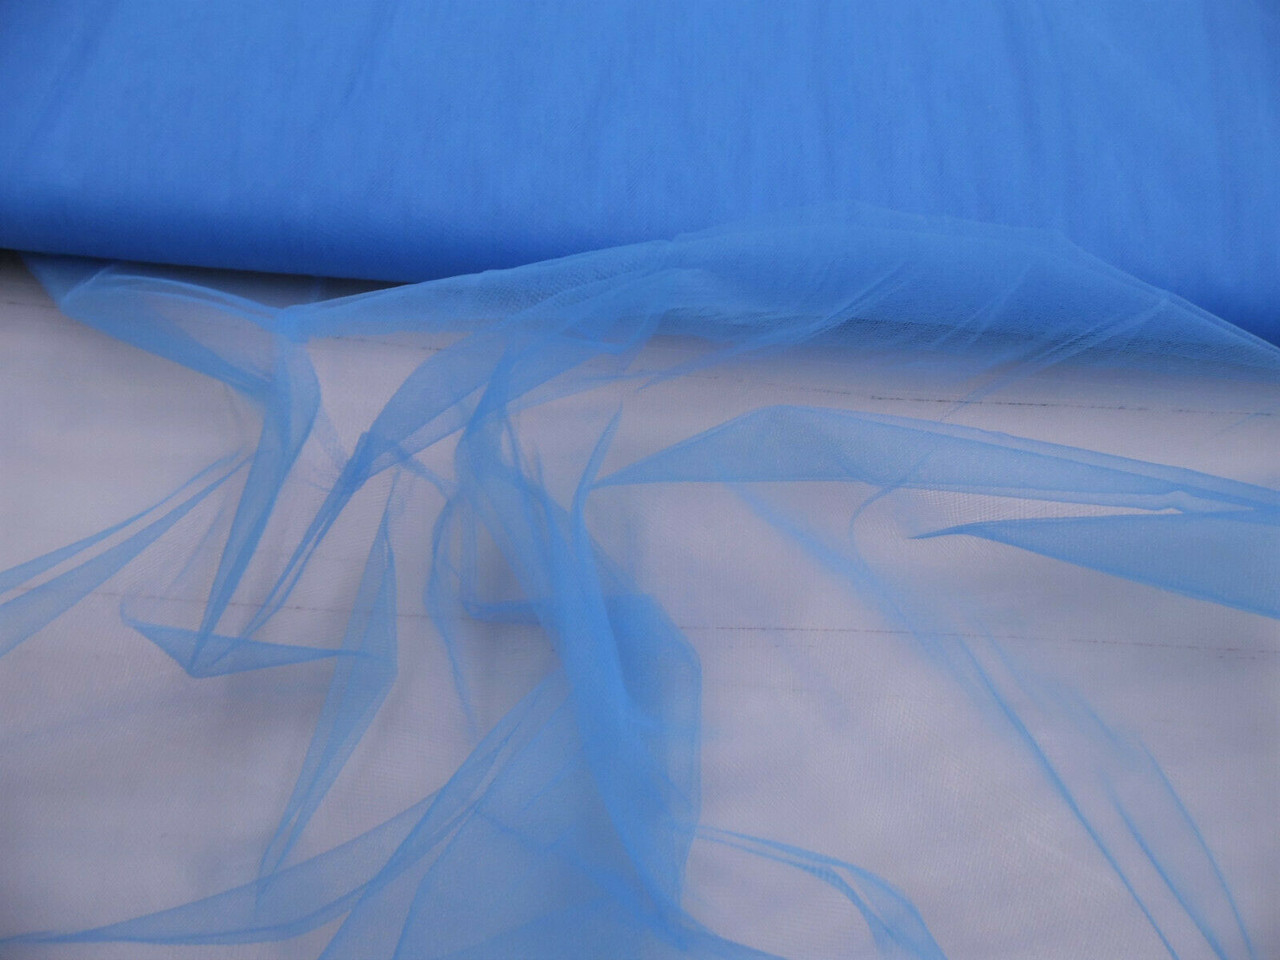 Nylon Tulle Sheer Fabric Turquoise Blue 54 inch wide DD313 - Discount  Designer Fabric - Paylessfabric.com